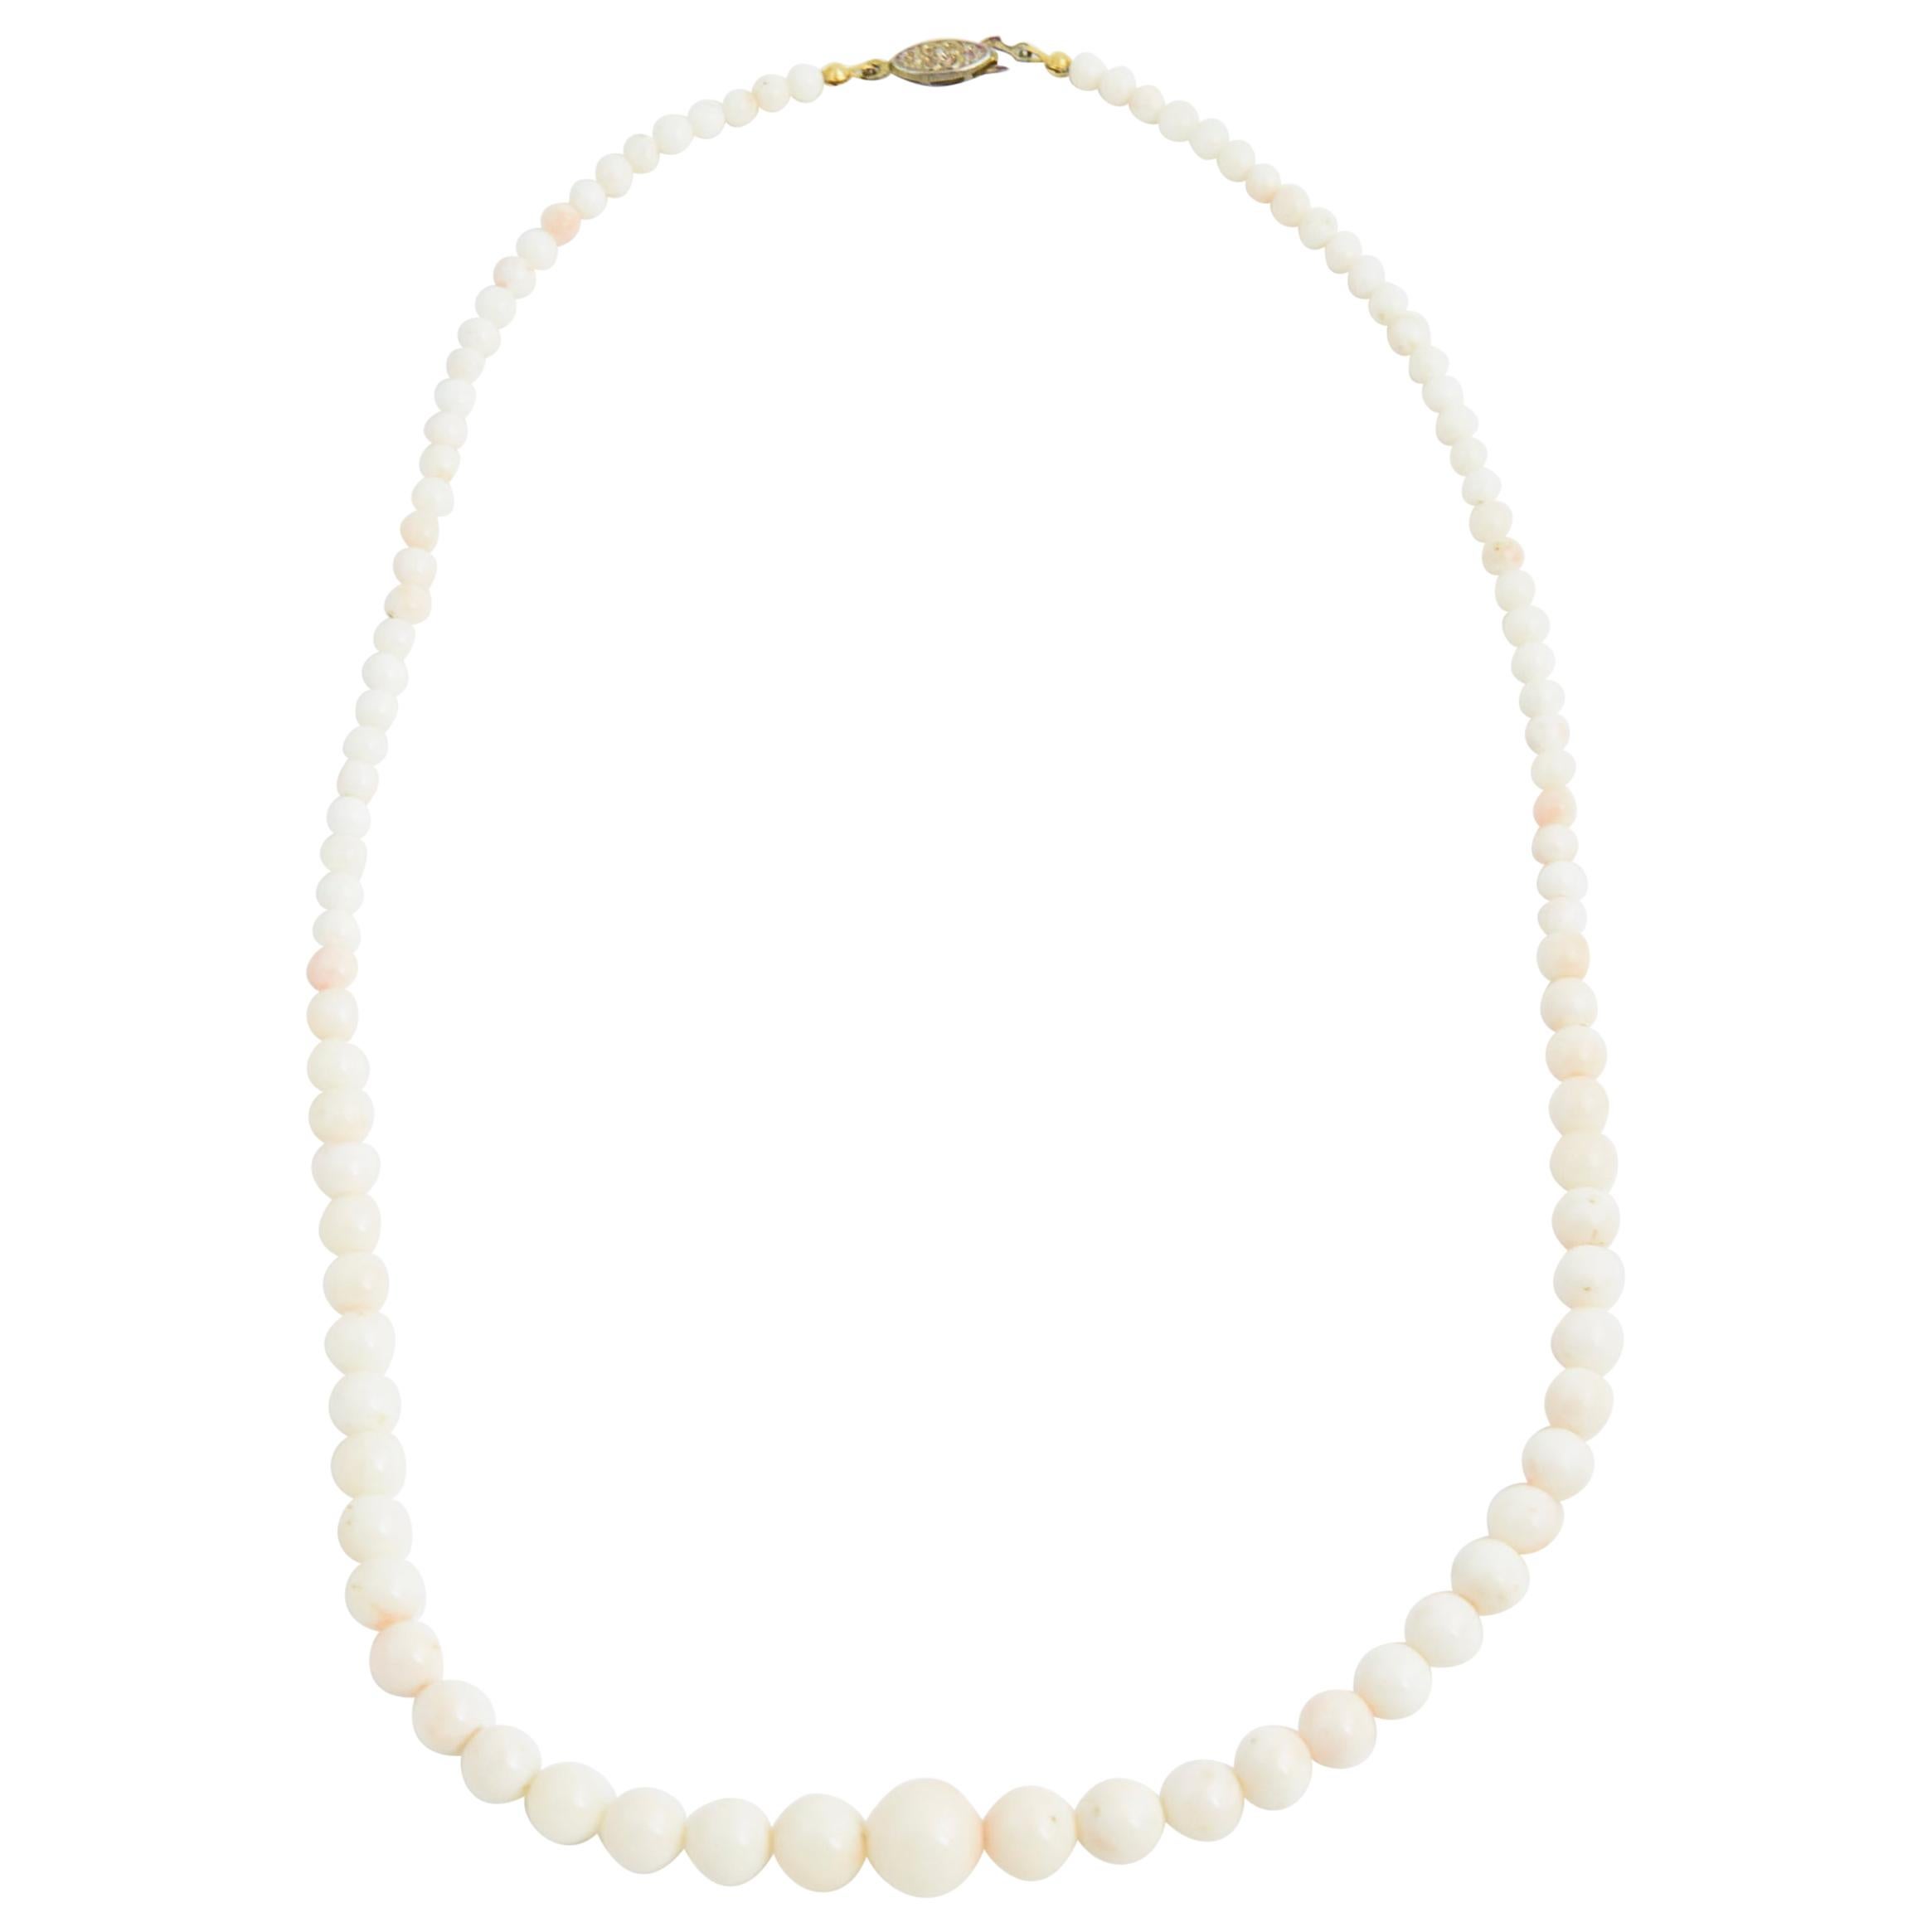 Graduated Angel Skin Coral Bead Necklace